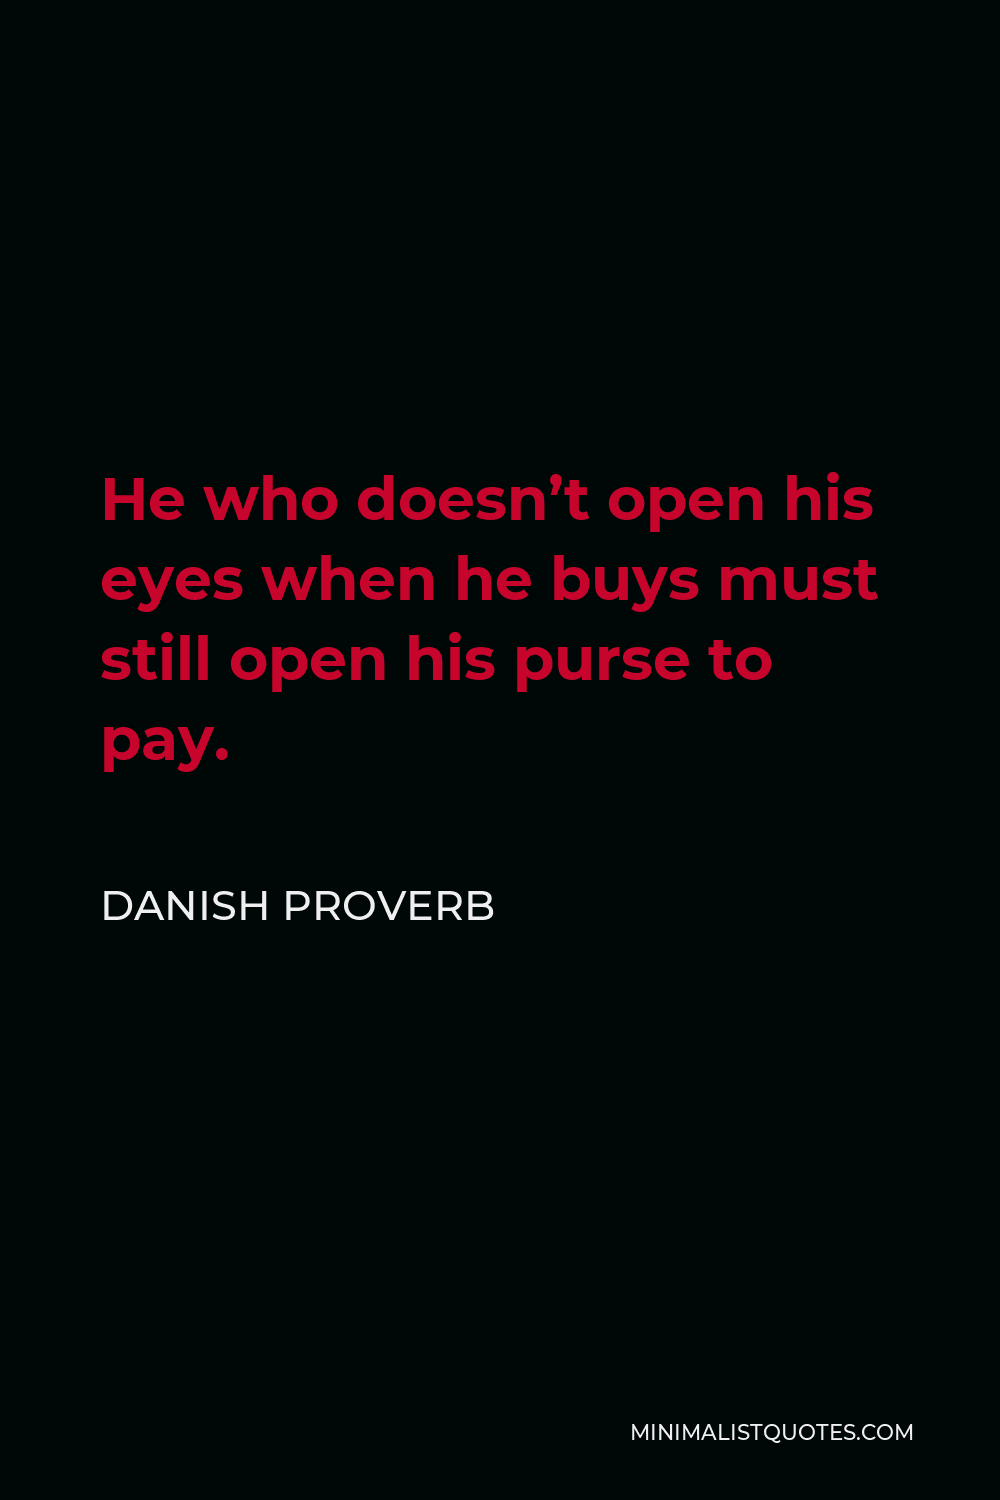 Danish Proverb Quote - He who doesn’t open his eyes when he buys must still open his purse to pay.